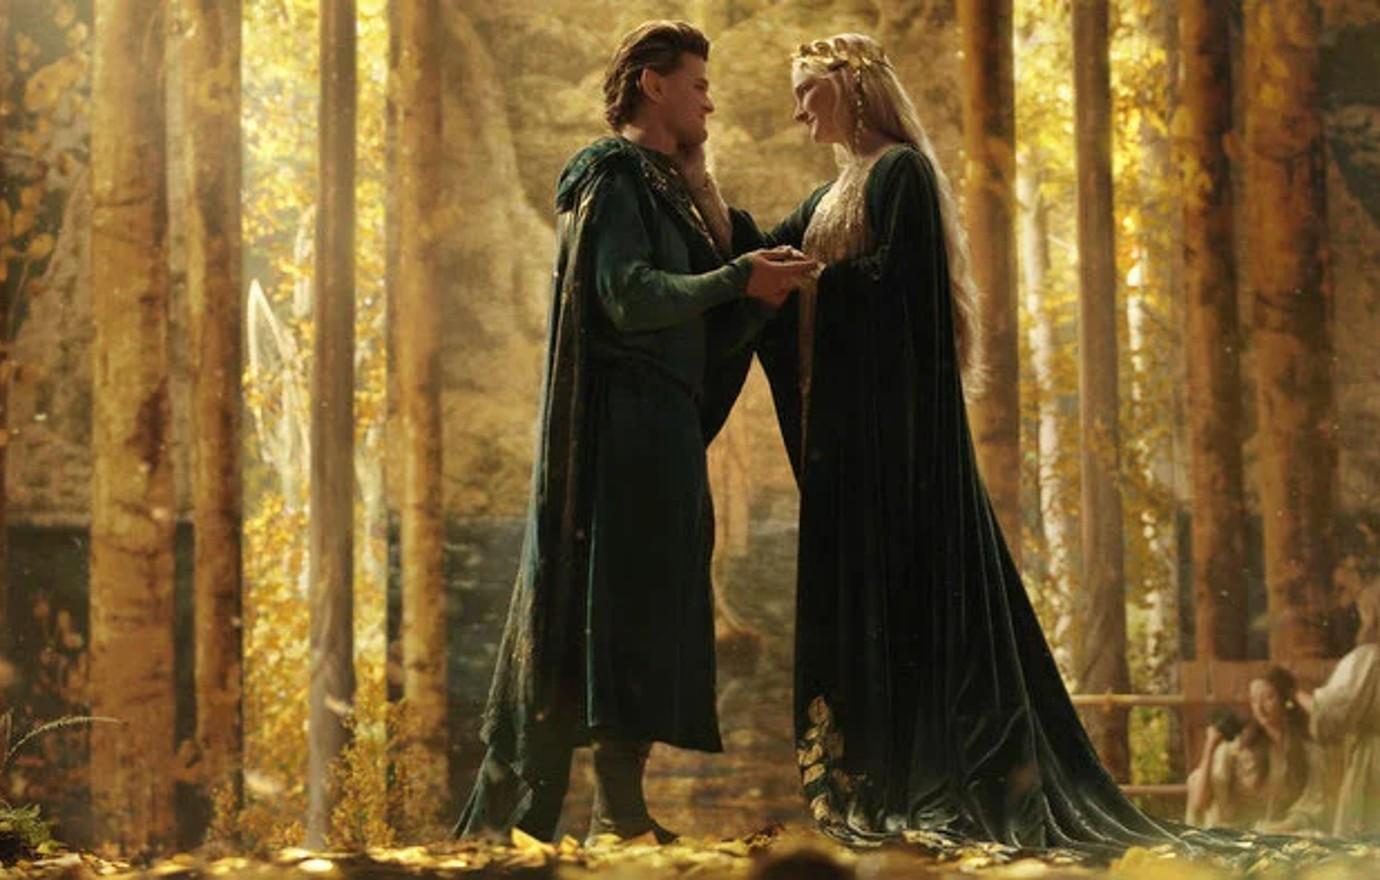 Lord Of The Rings Fanfic Writer Sues , Others For $250M